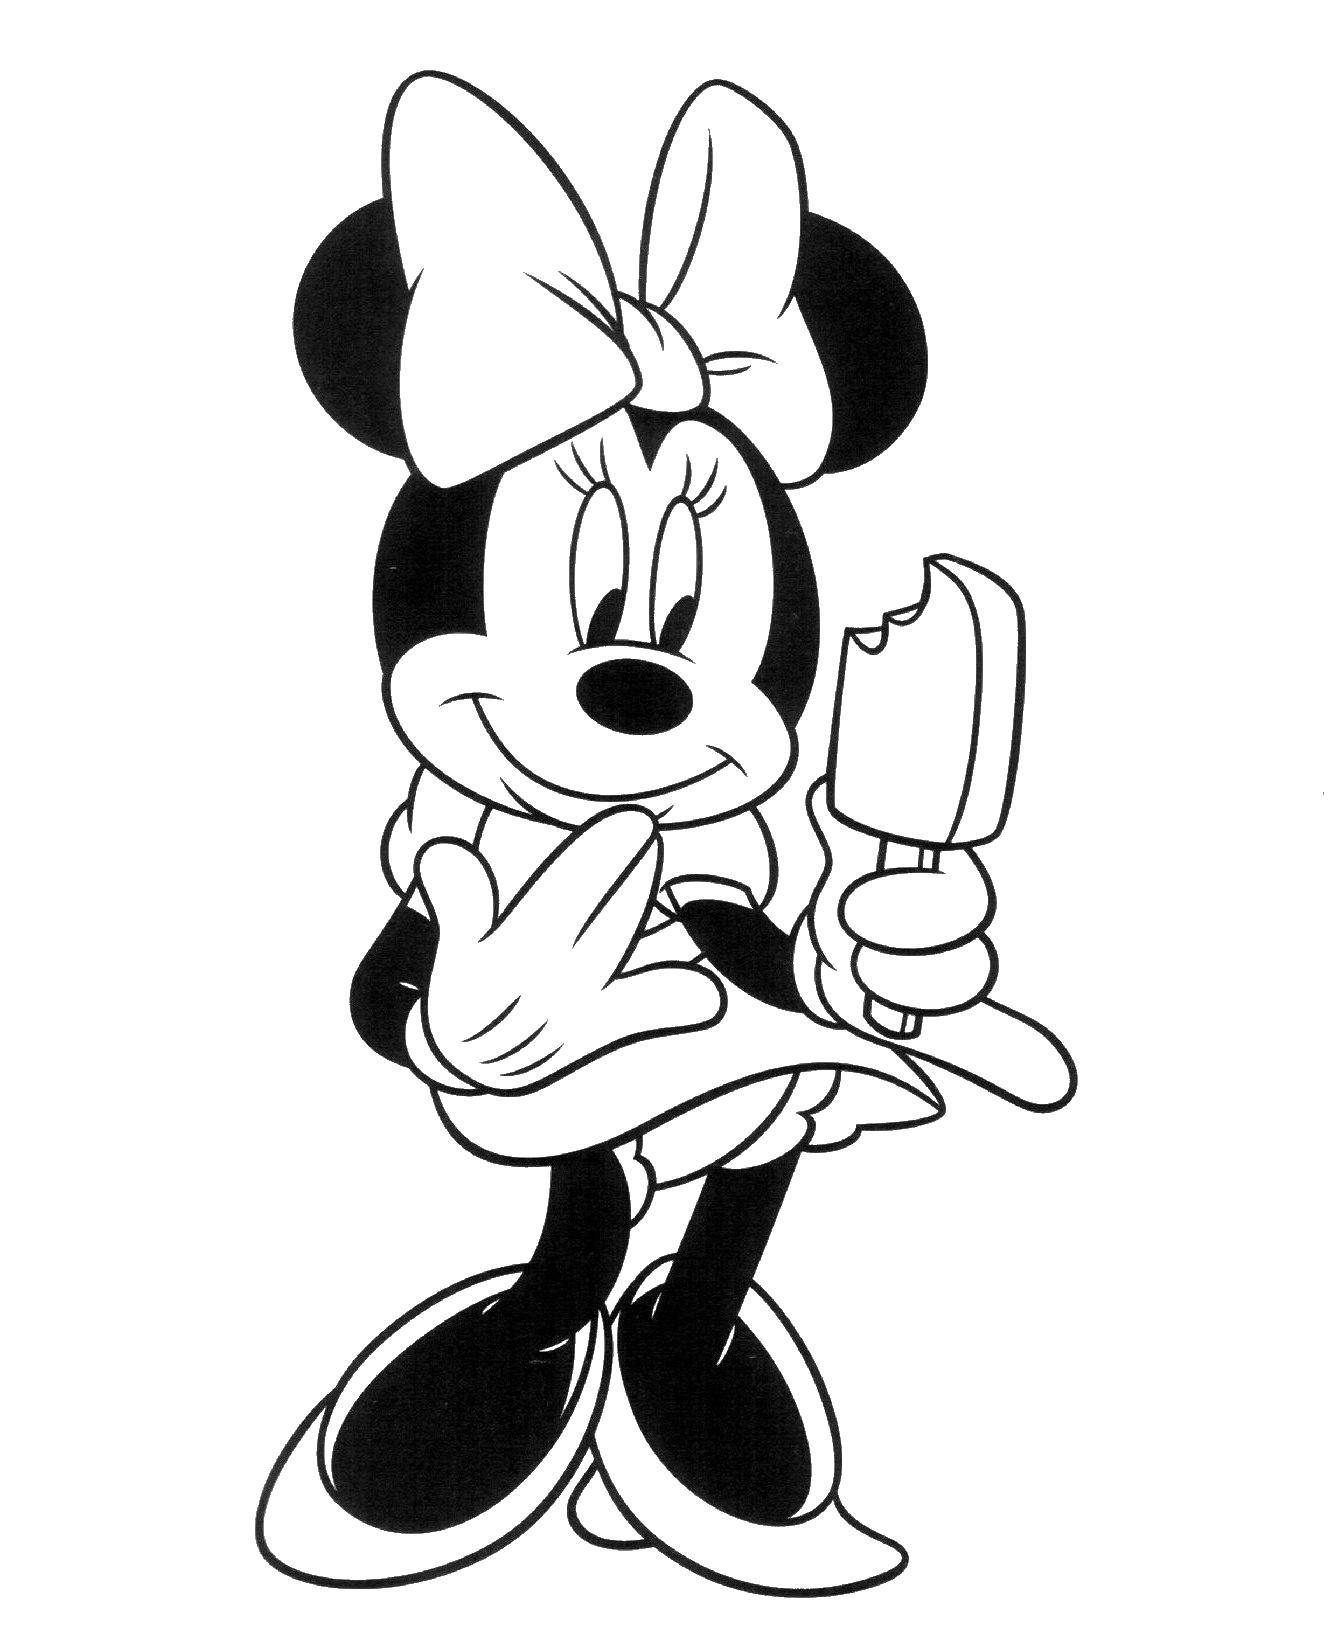 Coloring Minnie mouse eating Popsicle. Category Mickey mouse. Tags:  Disney, Mickey Mouse, Minnie Mouse.